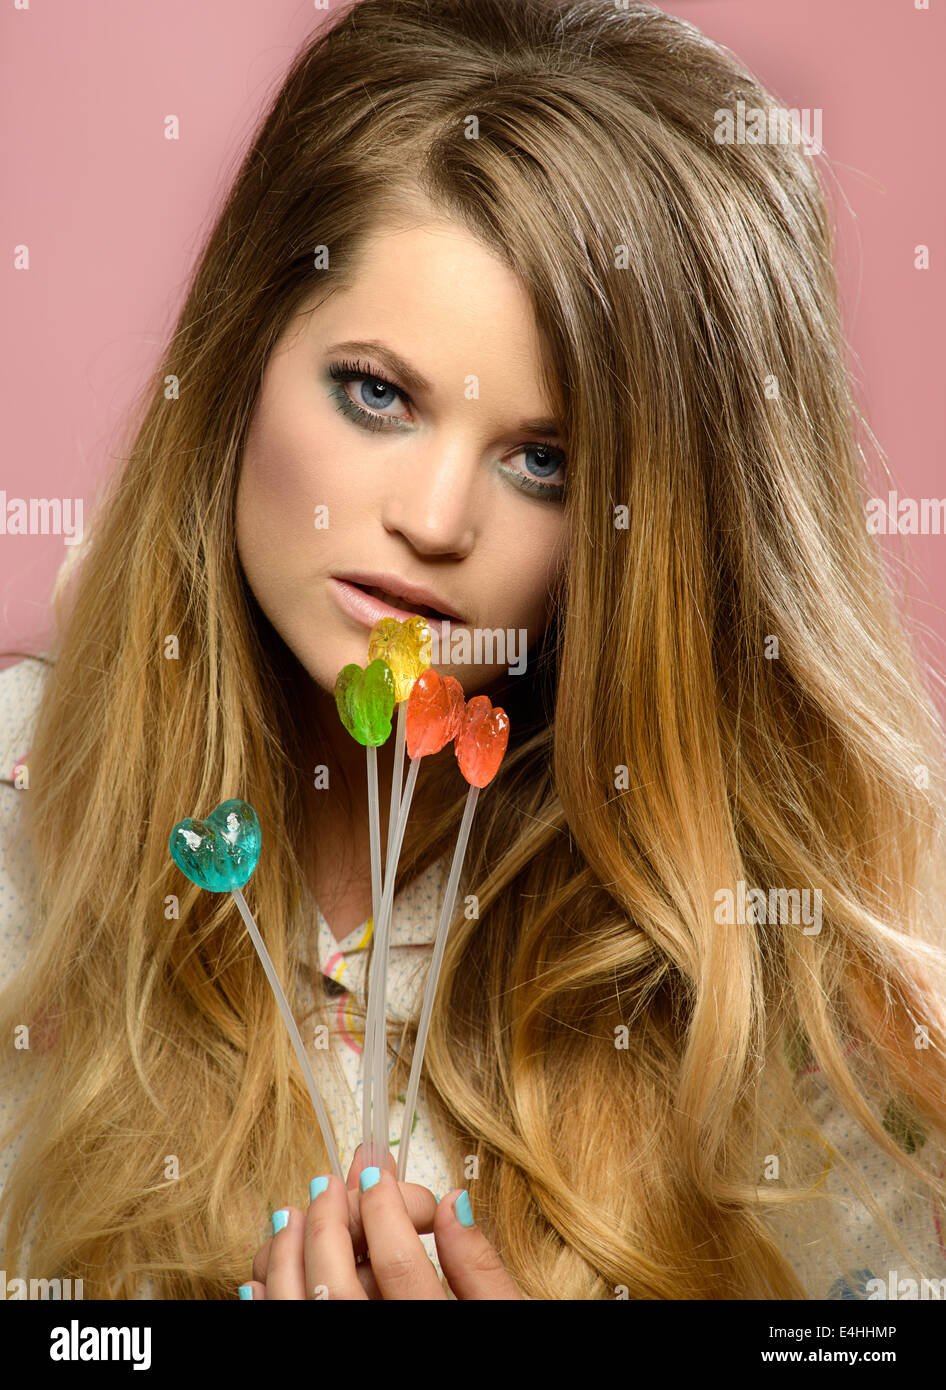 A pretty blond woman holding colorful heart candies, tilting her head posing. She has a 60s big hairstyle looking romantic. Stock Photo